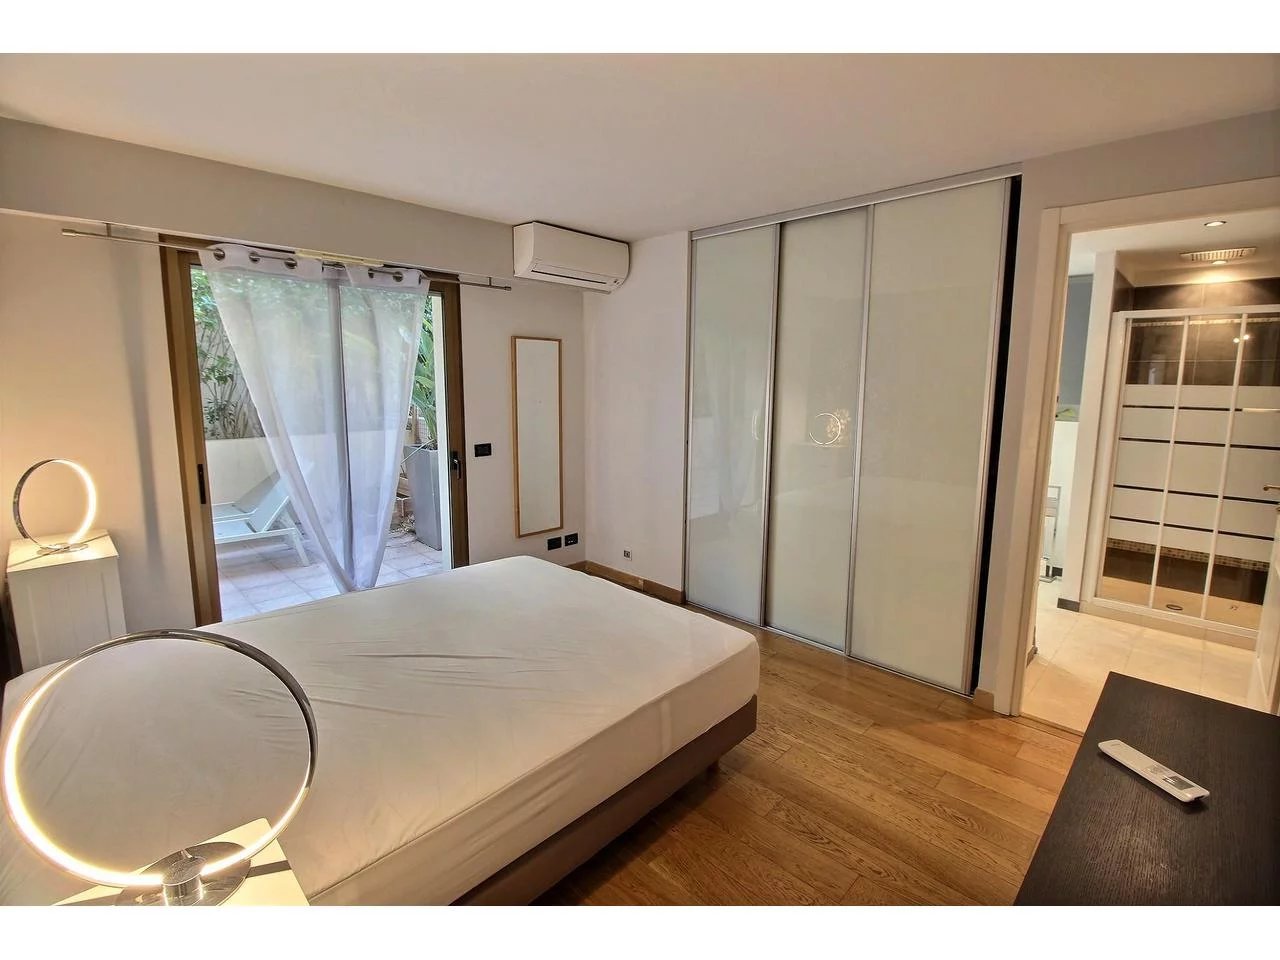 Appartement  2 Rooms 44.47m2  for sale   450 000 €